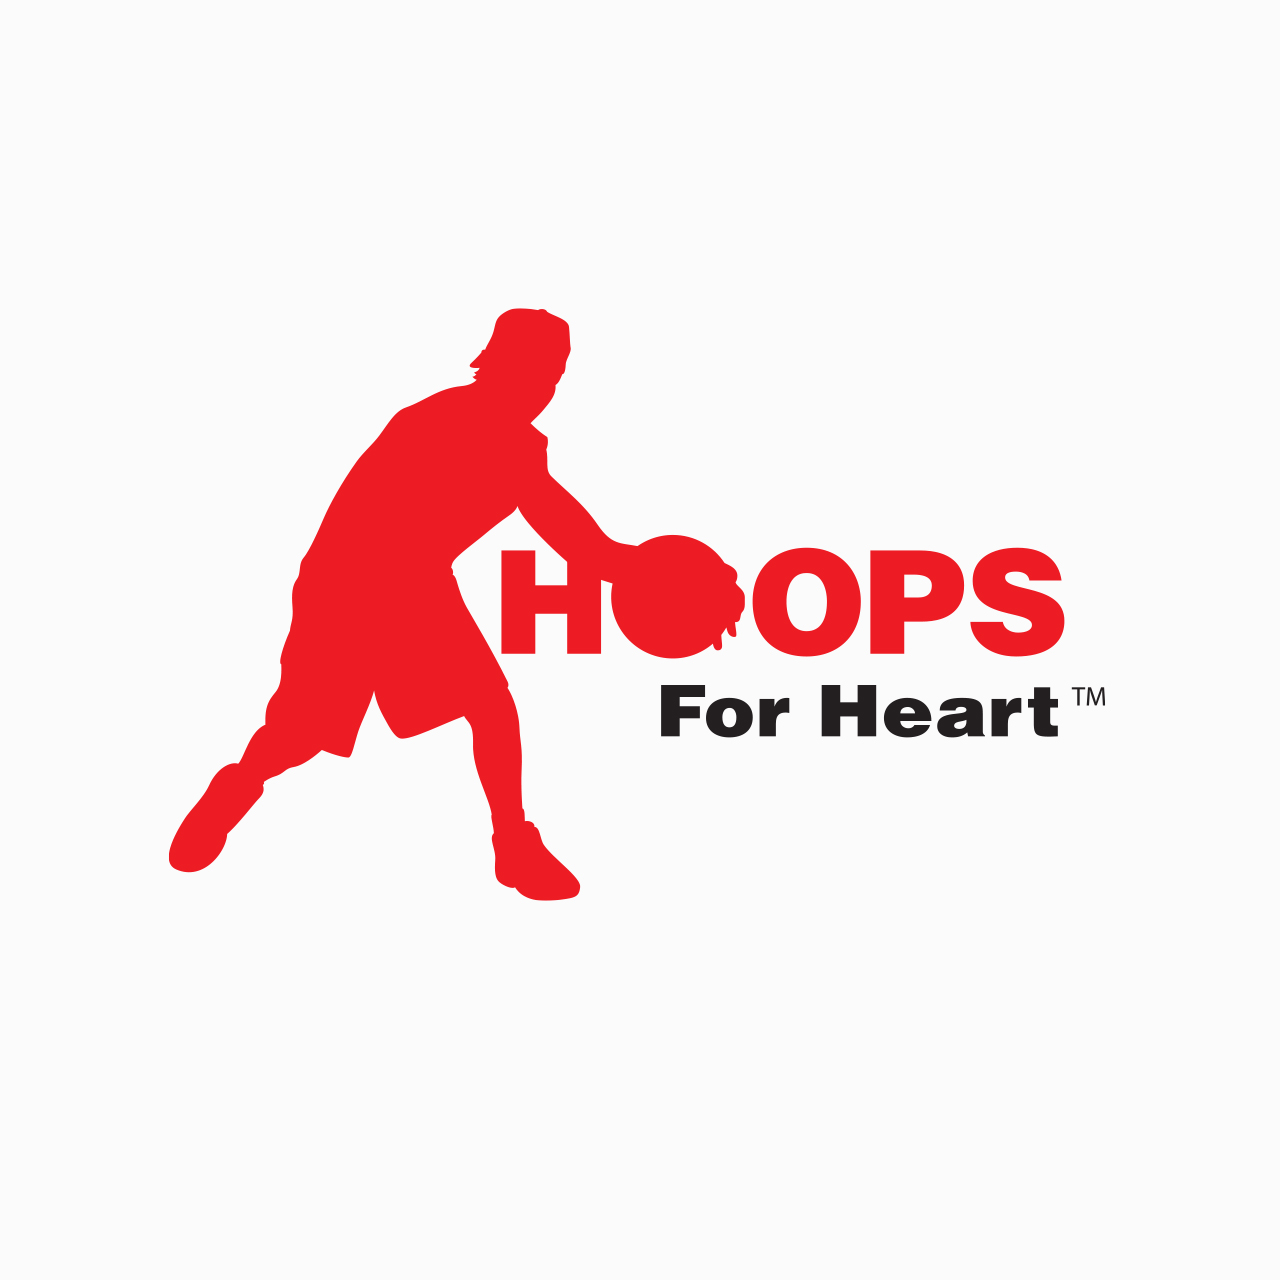 Logo design and type treatment for American Heart Association's Hoops for Hearts Program